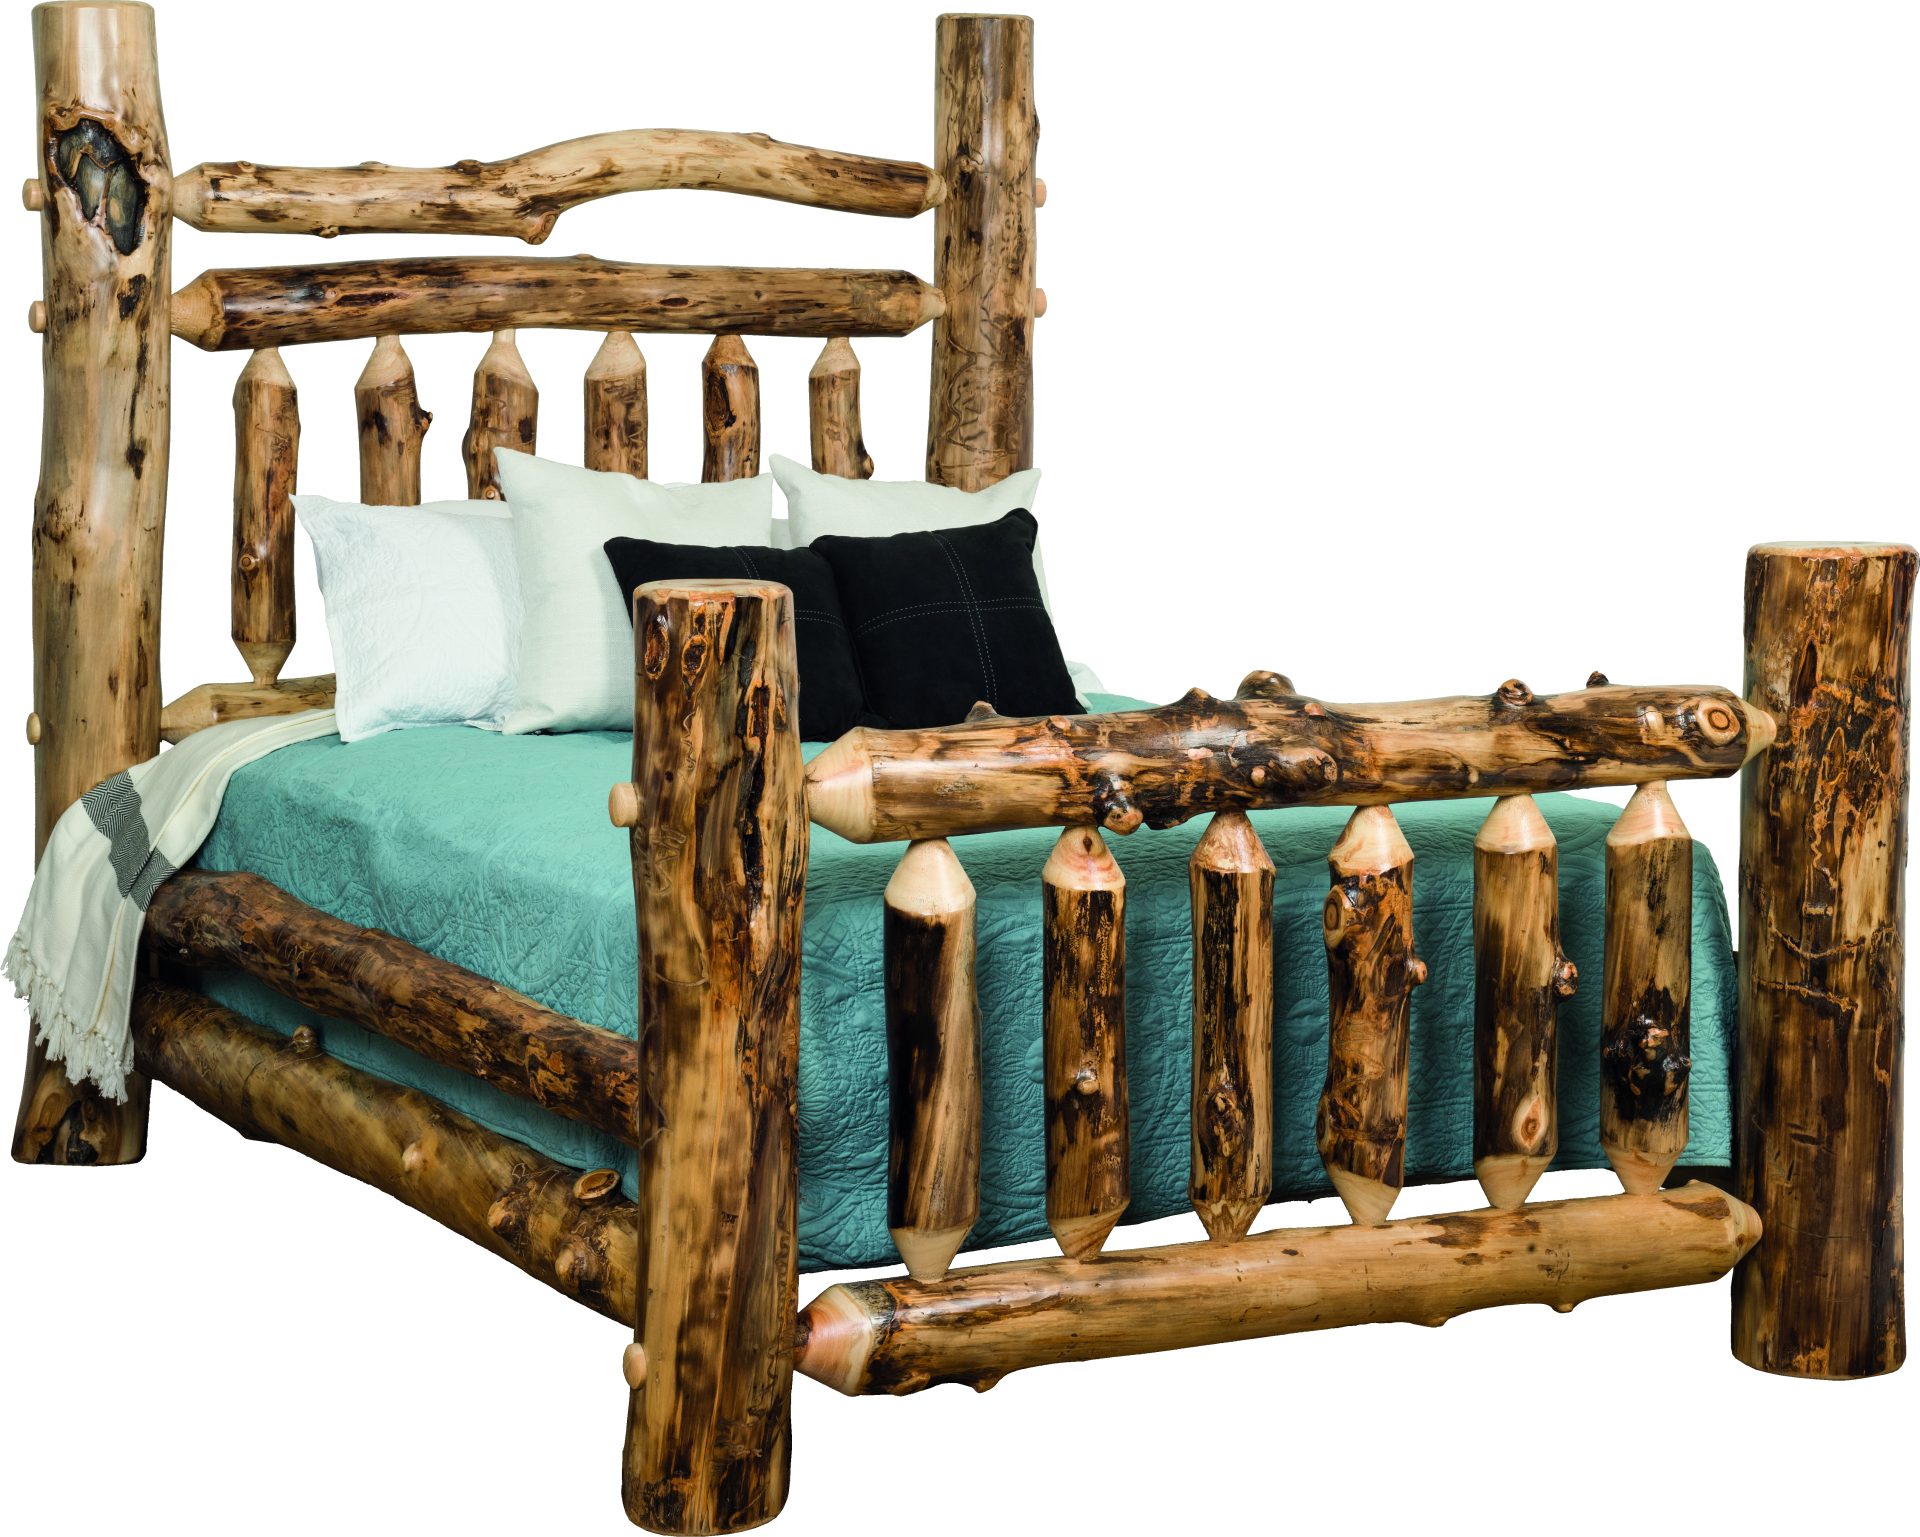 Double Rail Grand Bed – Queen or King Size